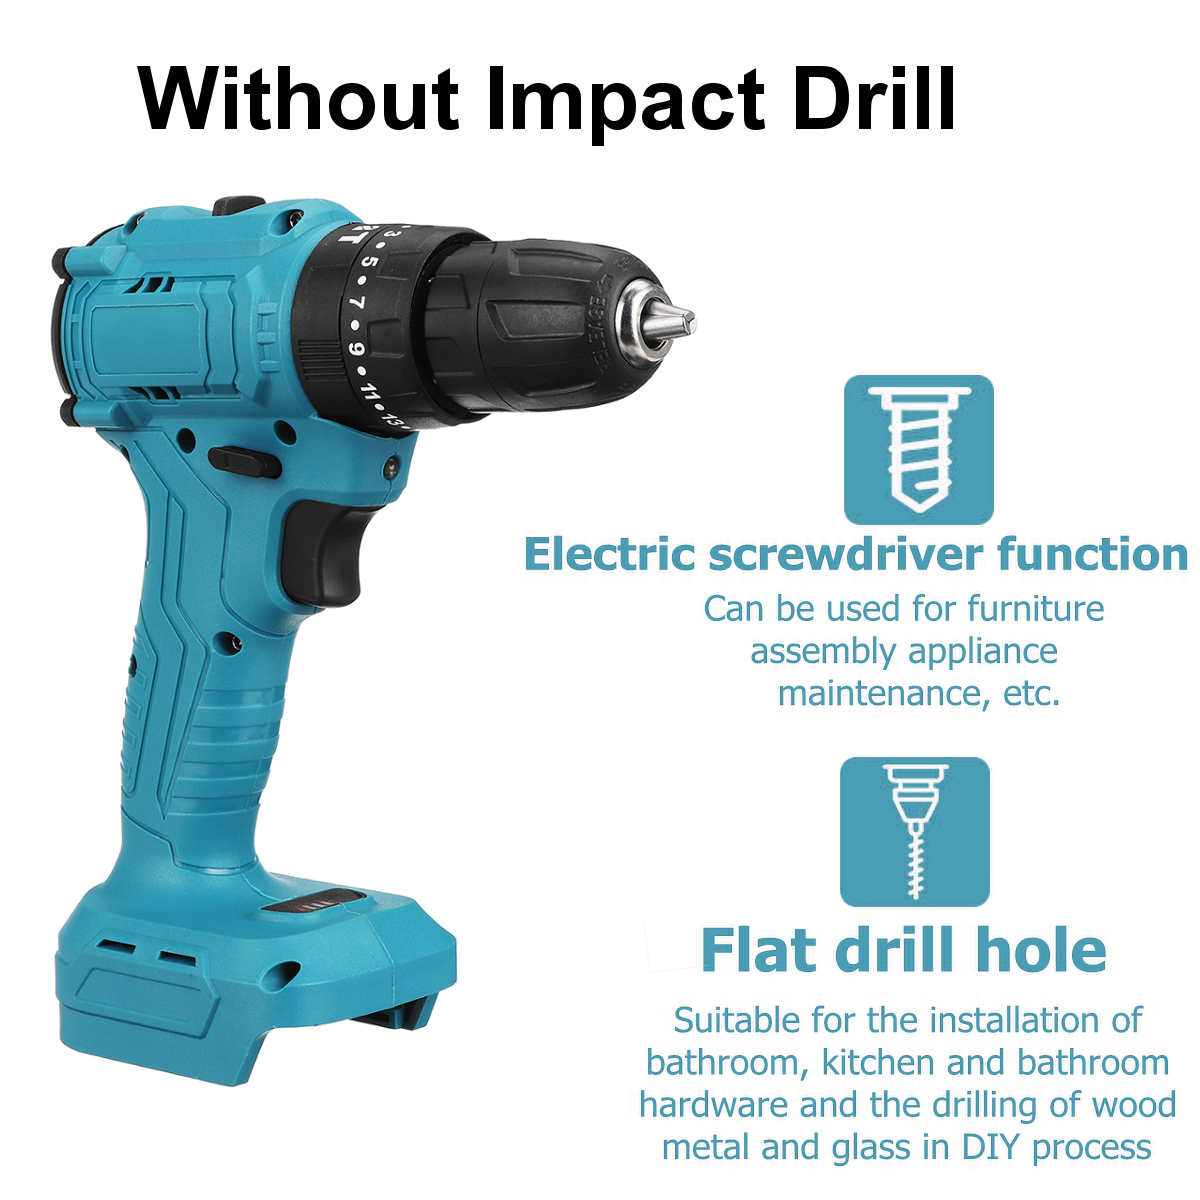 520Nm-Brushless-Cordless-38-Electric-Impact-Drill-Driver-Replacement-for-Makita-18V-Battery-1733295-8